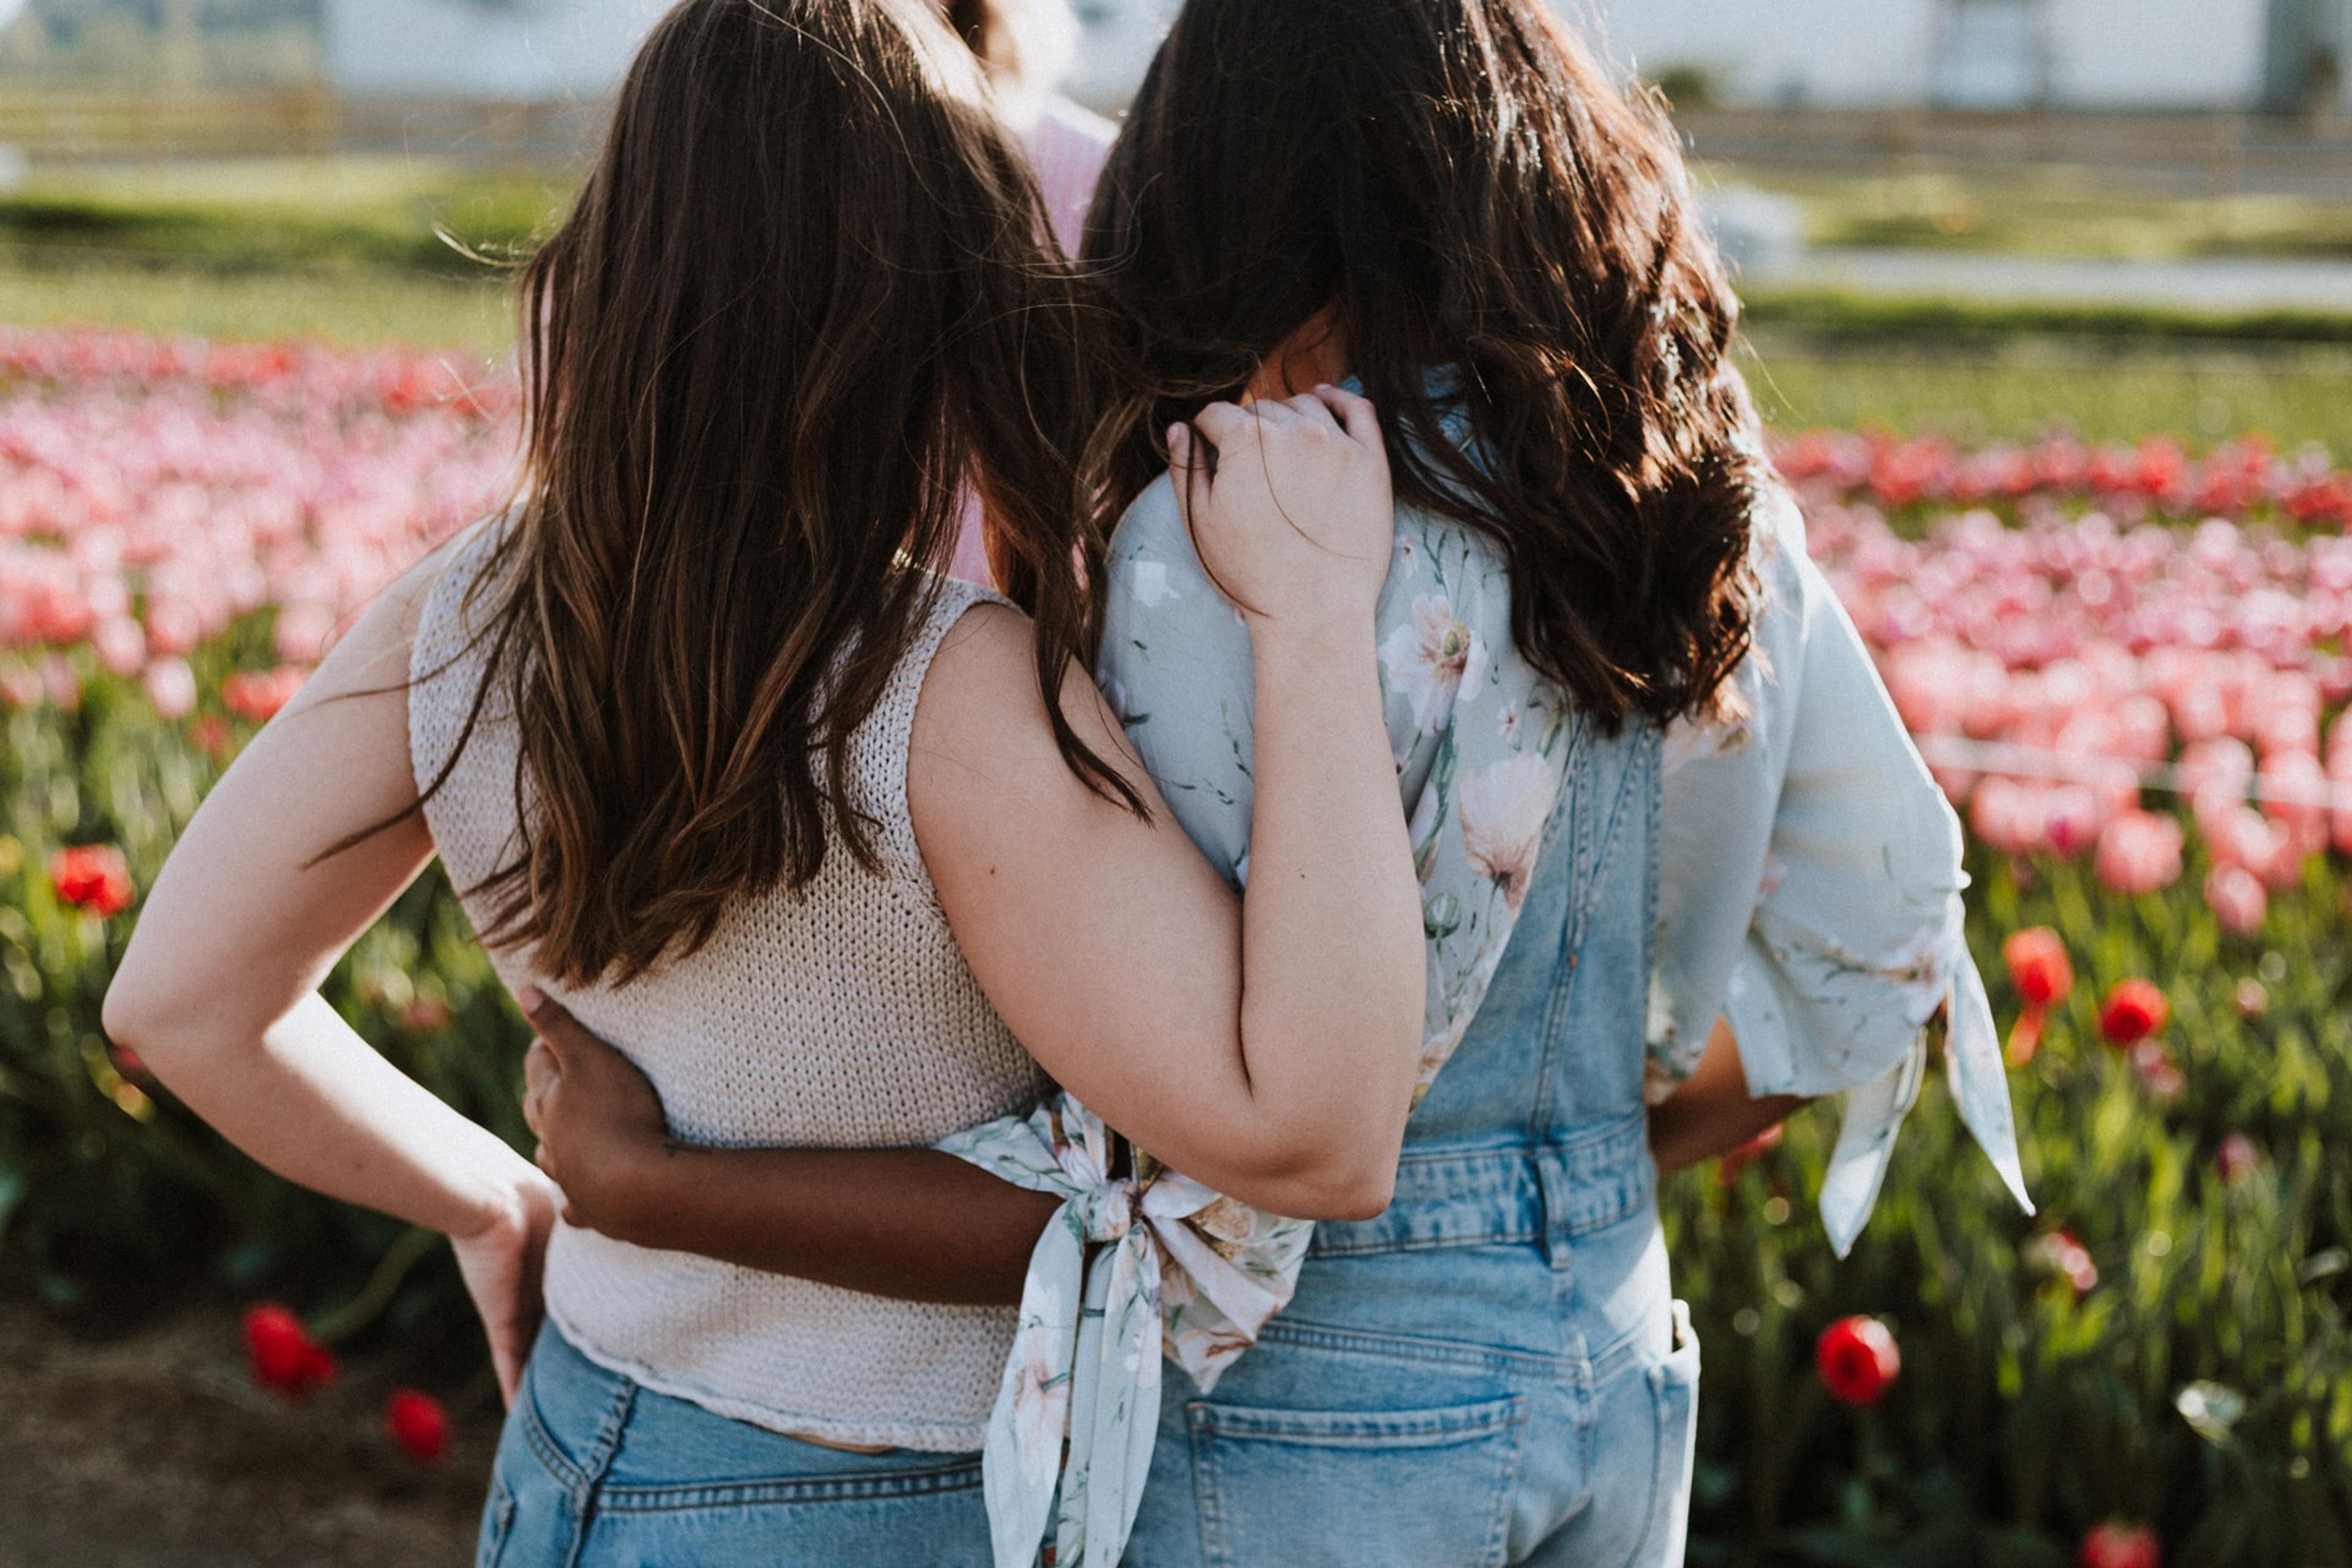 Two girls, backs to the camera, stand with their arms around each other looking out on a field of tulips